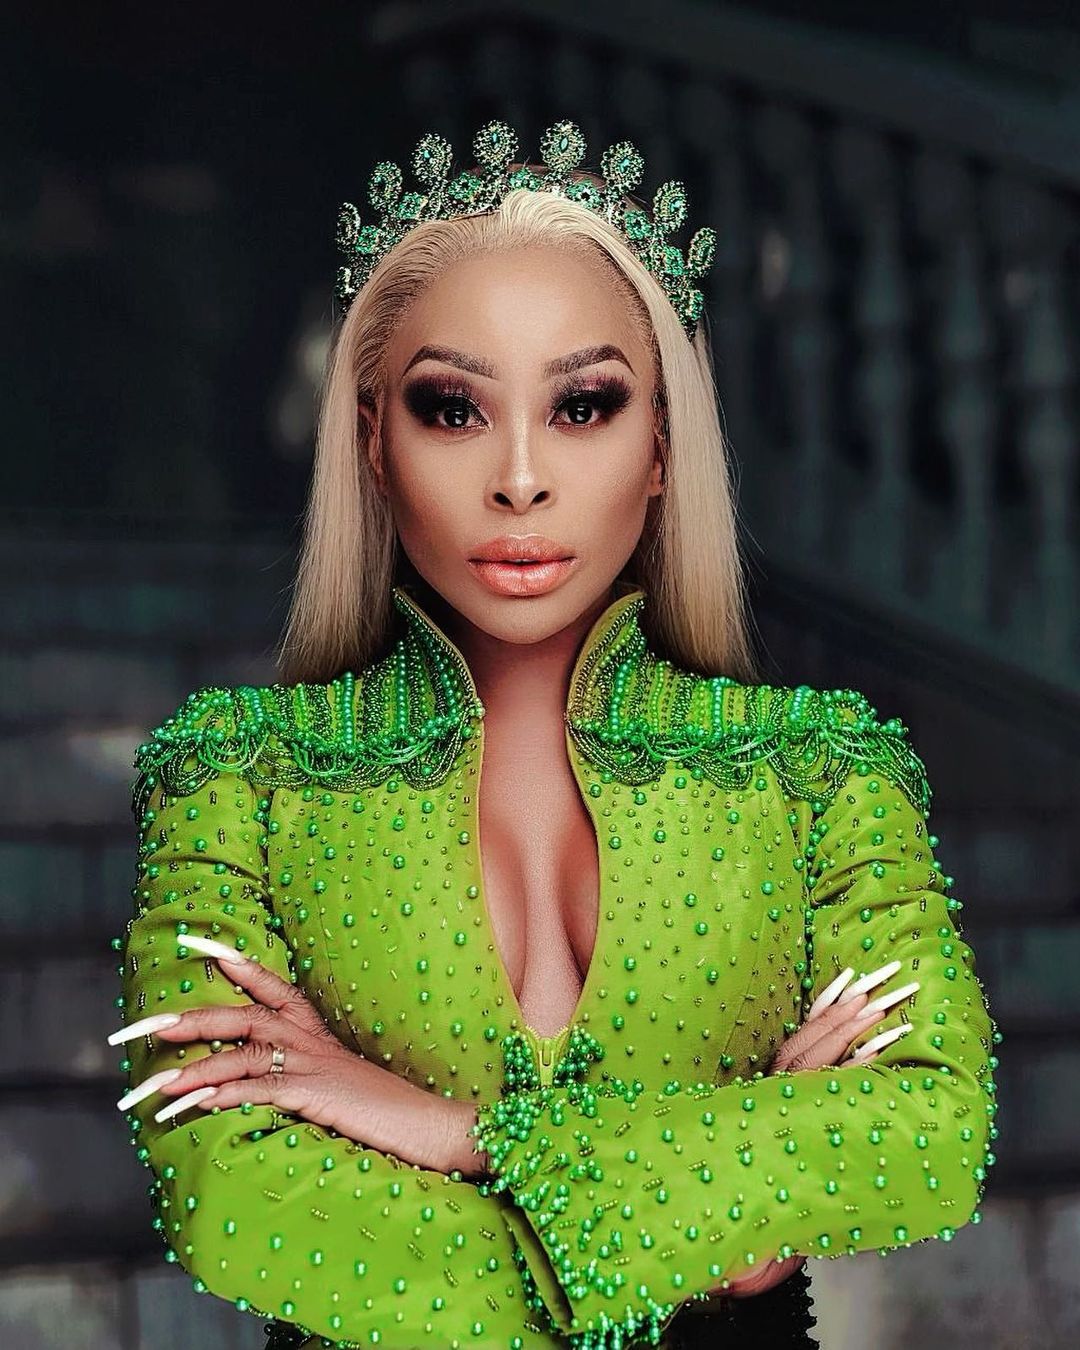 Khanyi Mbau gives tips on how to lighten your skin perfectly